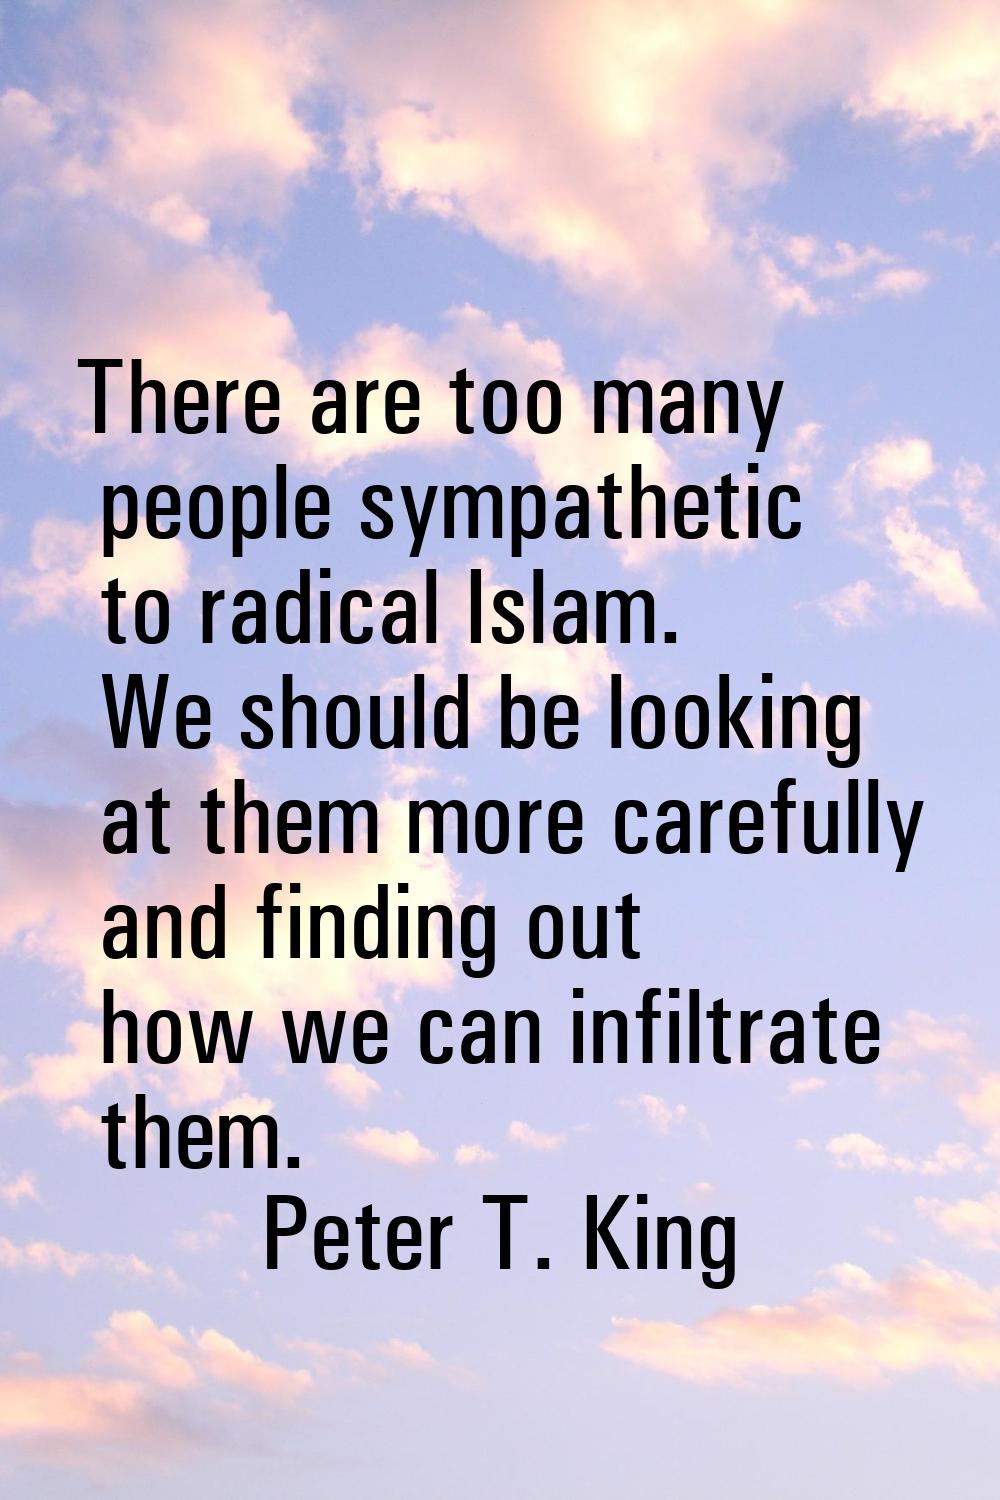 There are too many people sympathetic to radical Islam. We should be looking at them more carefully